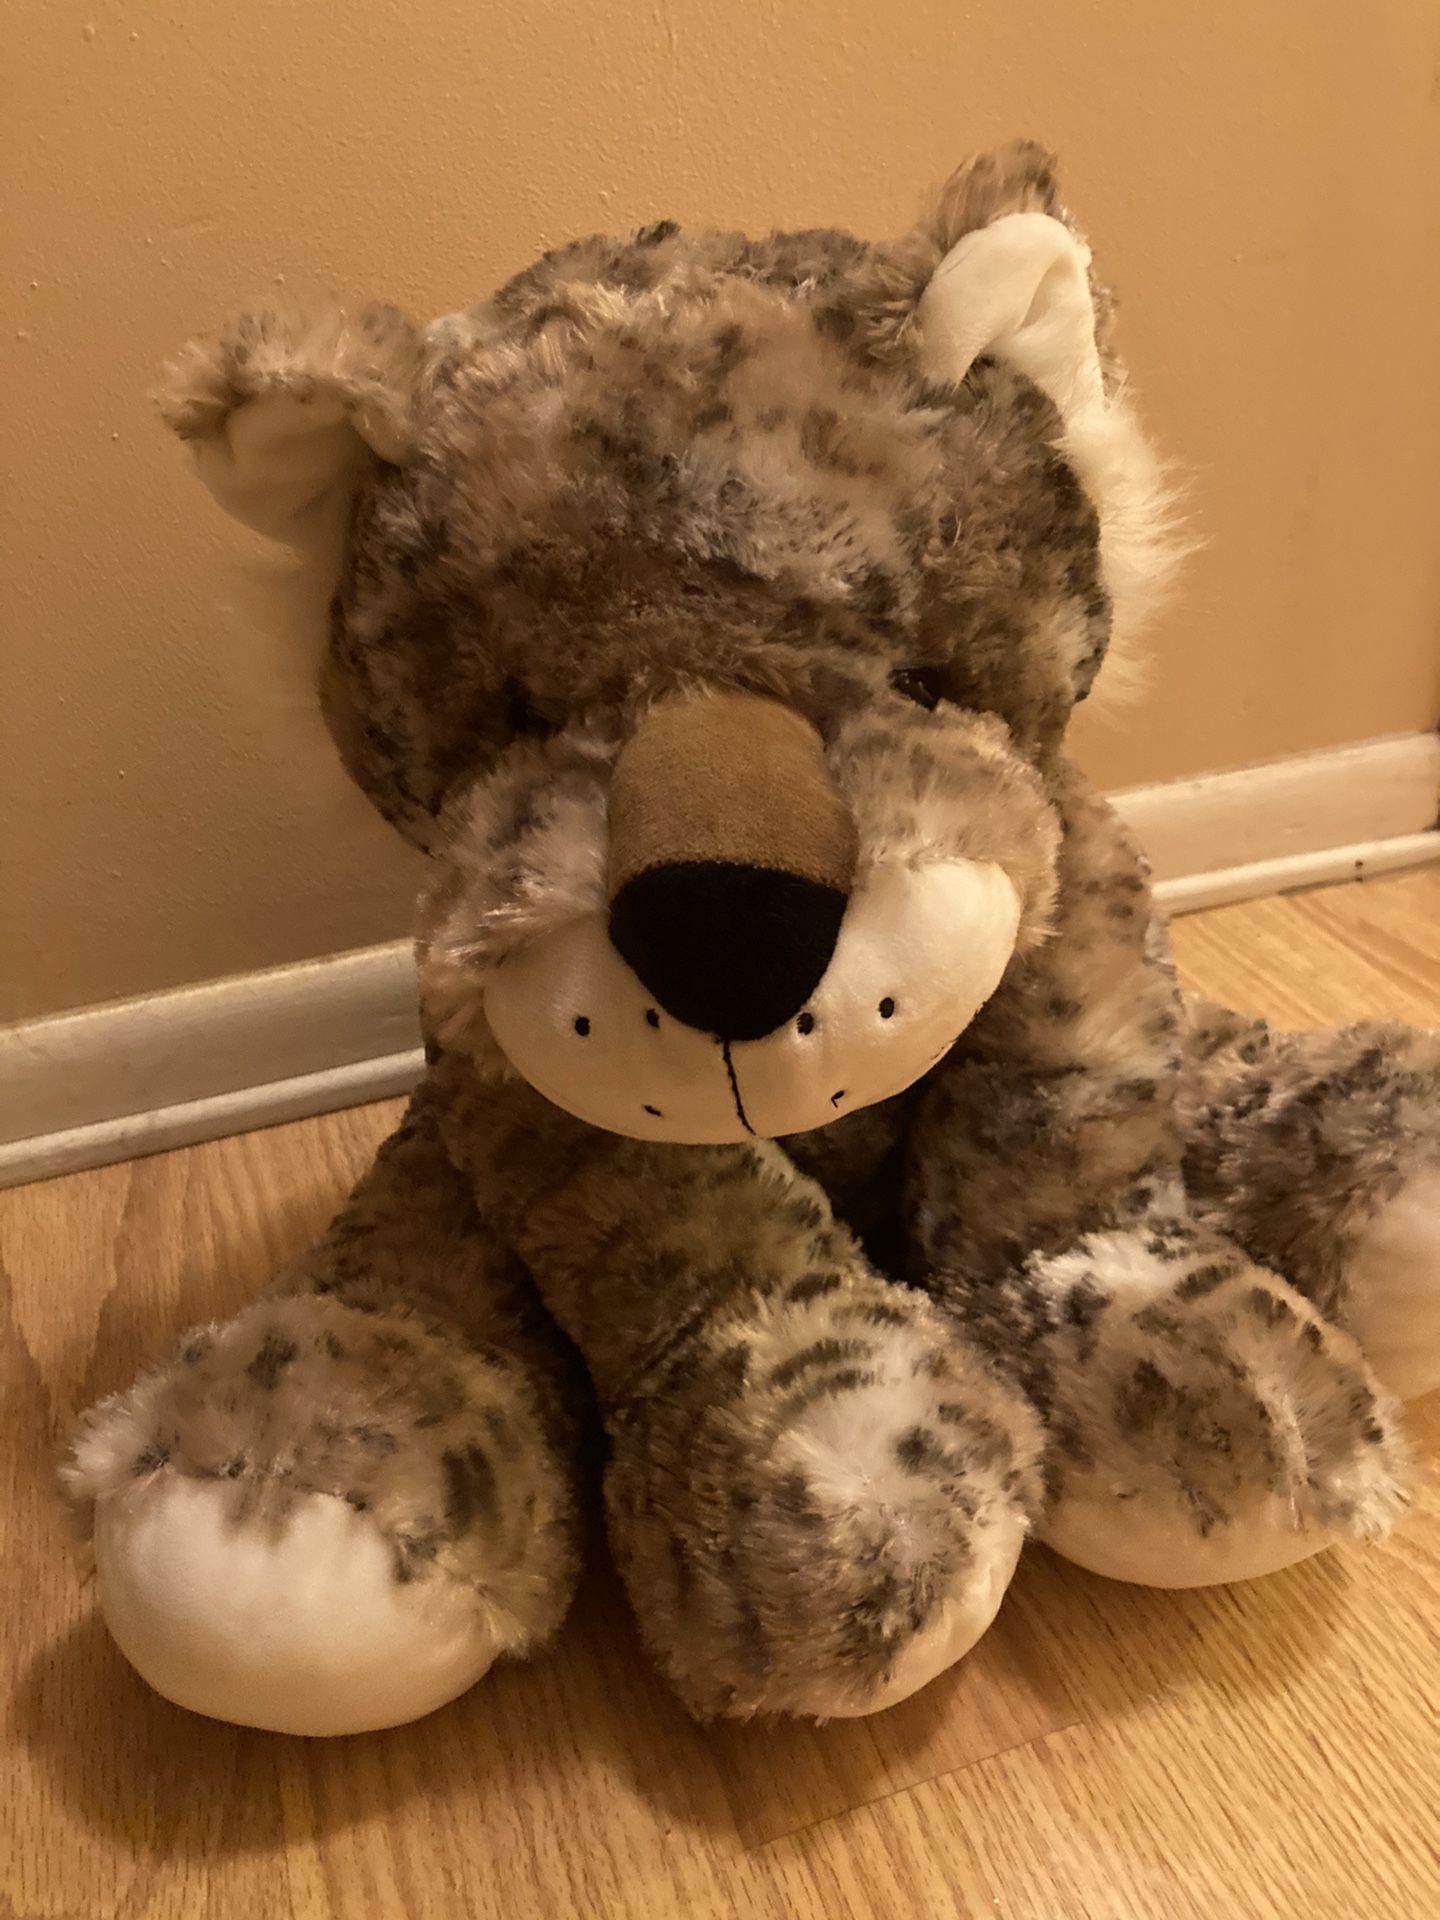 New. Adorable stuffed leopard ON HOLD